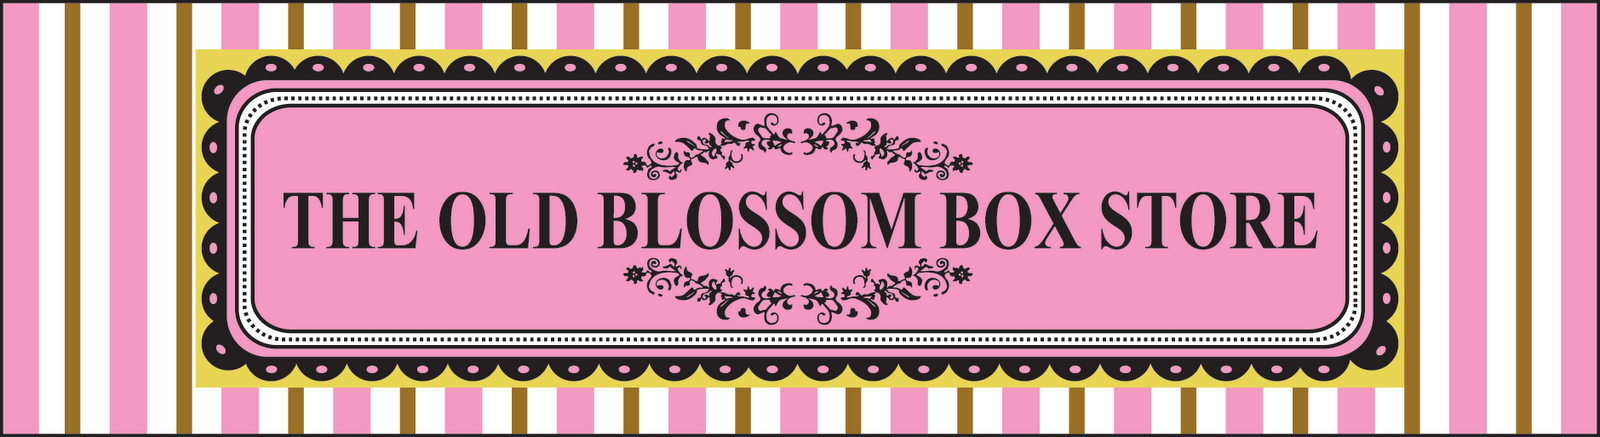 OLD BLOSSOM BOX: AVAILABLE ITEMS